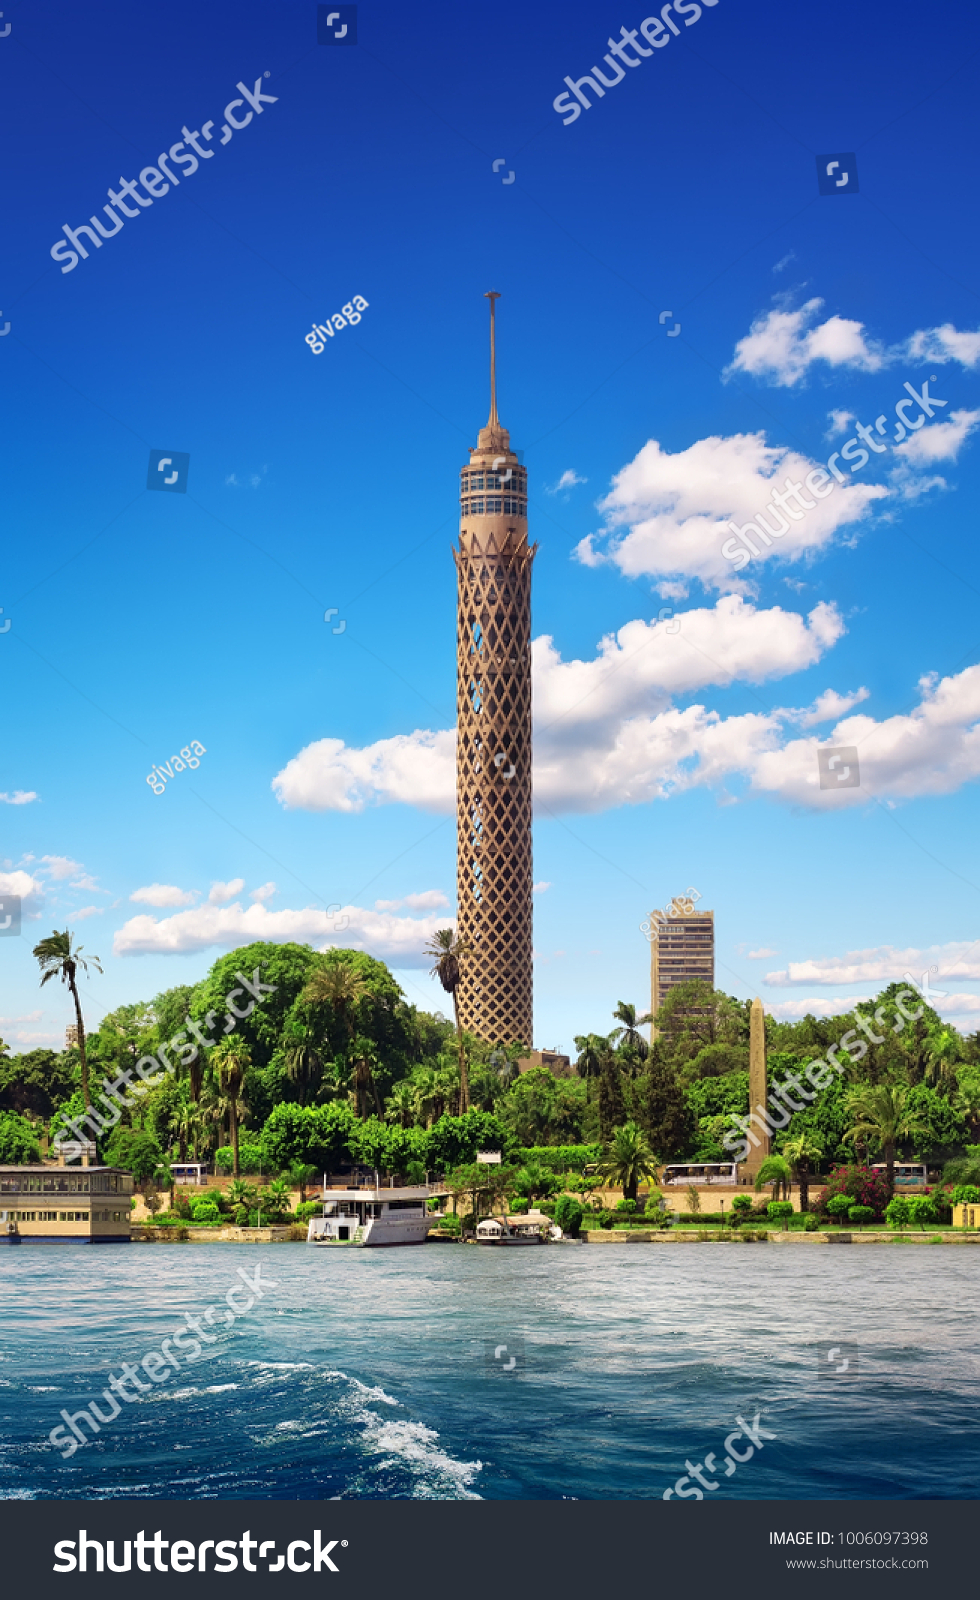 Tall TV tower in Cairo #1006097398